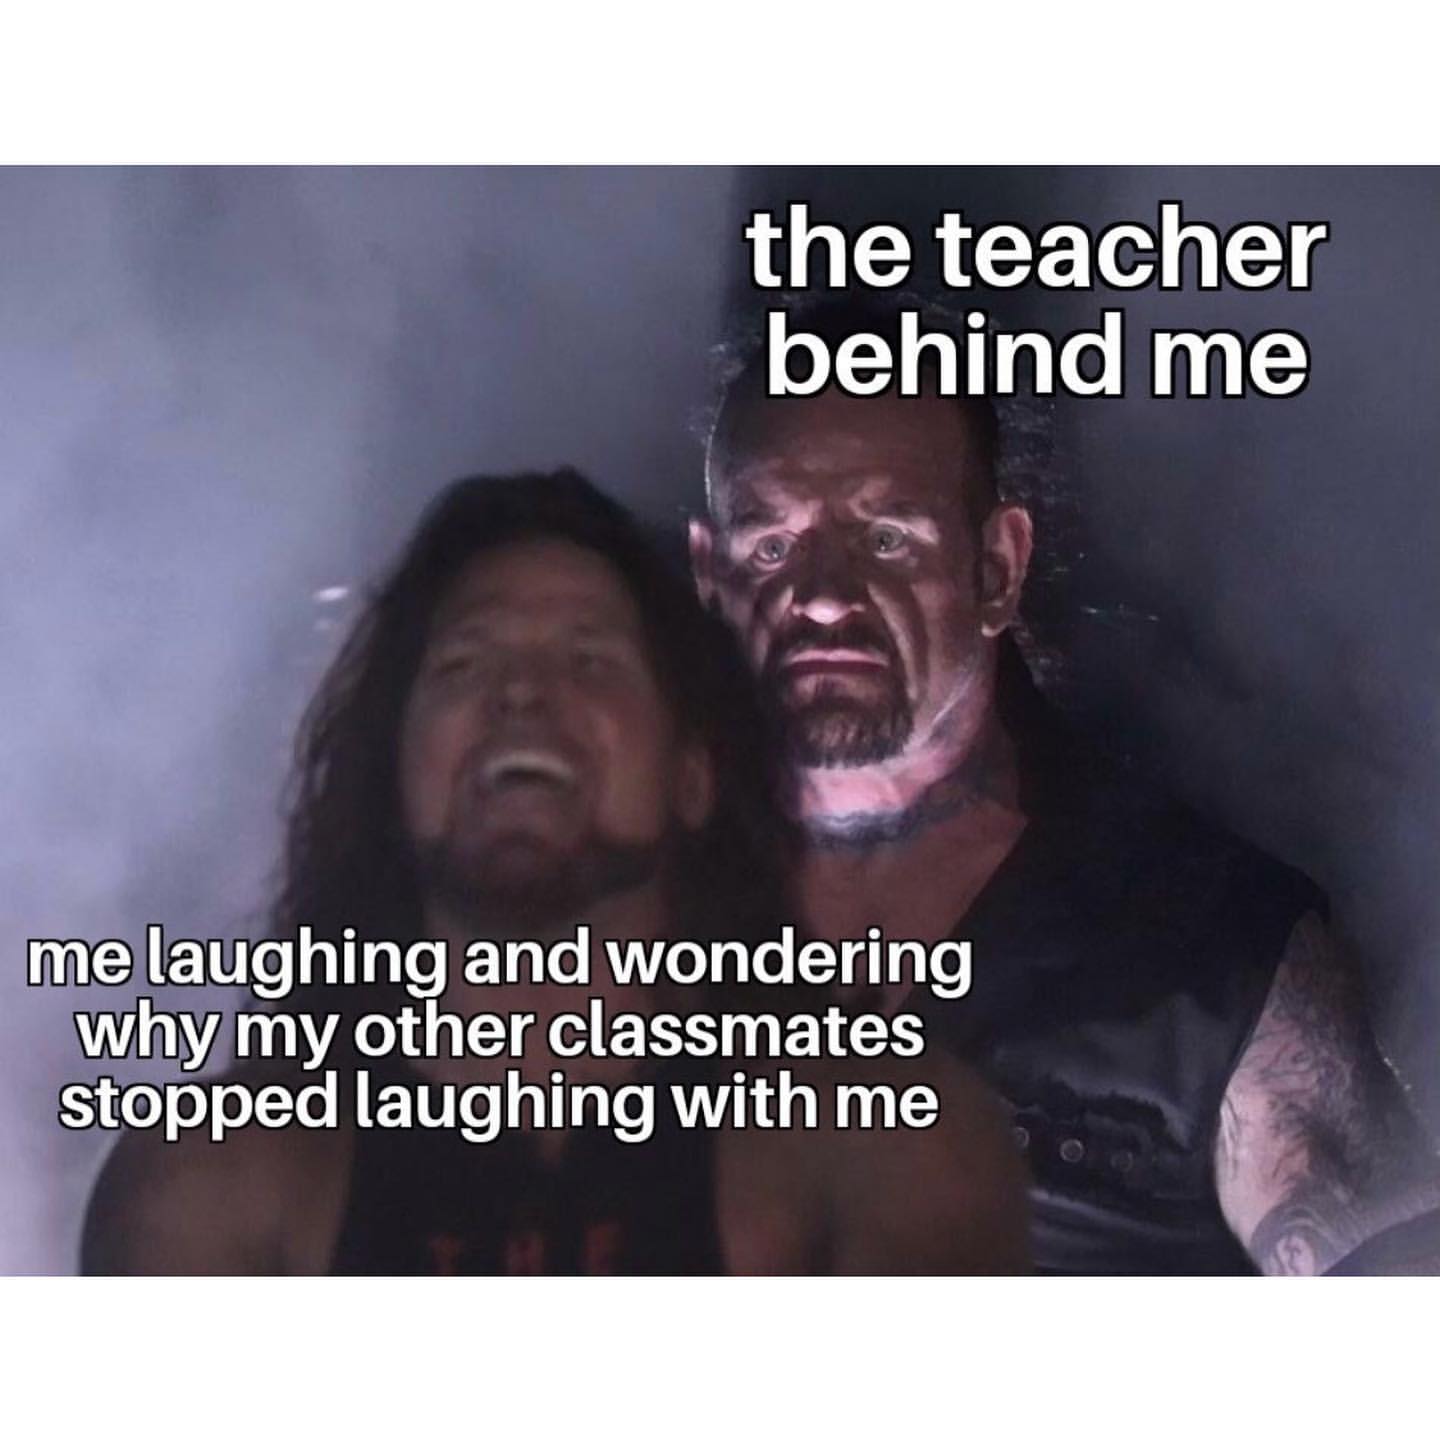 The teacher behind me.  Me laughing and wondering why my other classmates stopped laughing with me.